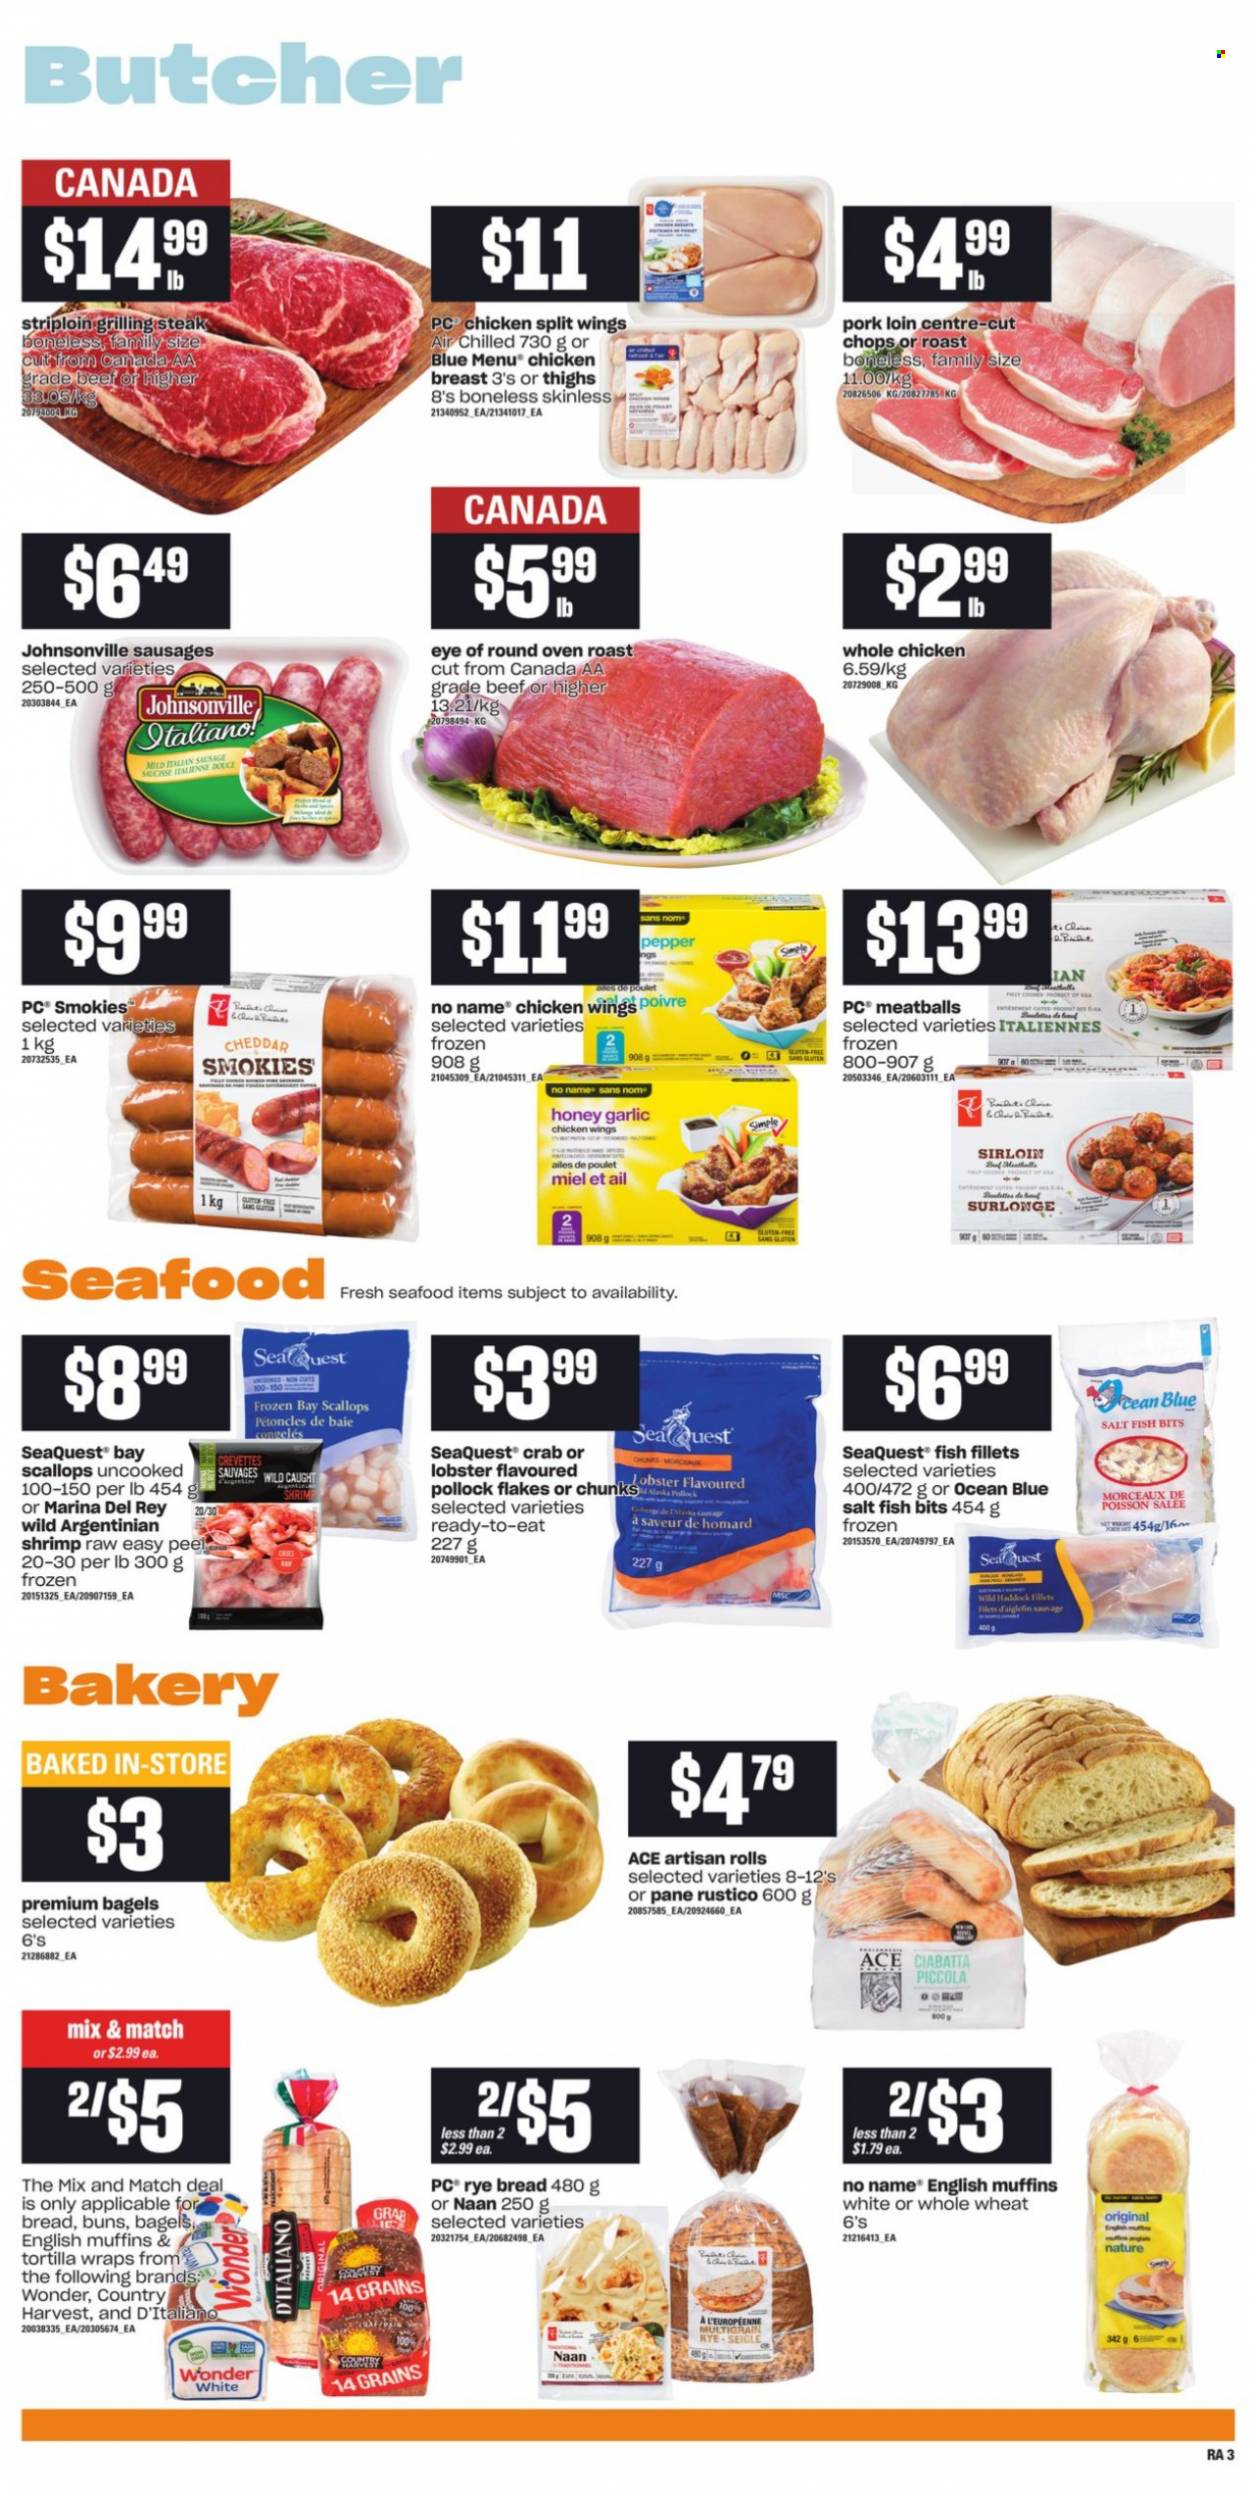 thumbnail - Atlantic Superstore Flyer - October 14, 2021 - October 20, 2021 - Sales products - bagels, english muffins, tortillas, buns, wraps, garlic, fish fillets, lobster, scallops, pollock, seafood, crab, fish, shrimps, No Name, meatballs, Johnsonville, sausage, cheddar, cheese, Country Harvest, chicken wings, salt, honey, whole chicken, chicken breasts, chicken, eye of round, pork loin, pork meat, ciabatta, steak. Page 6.